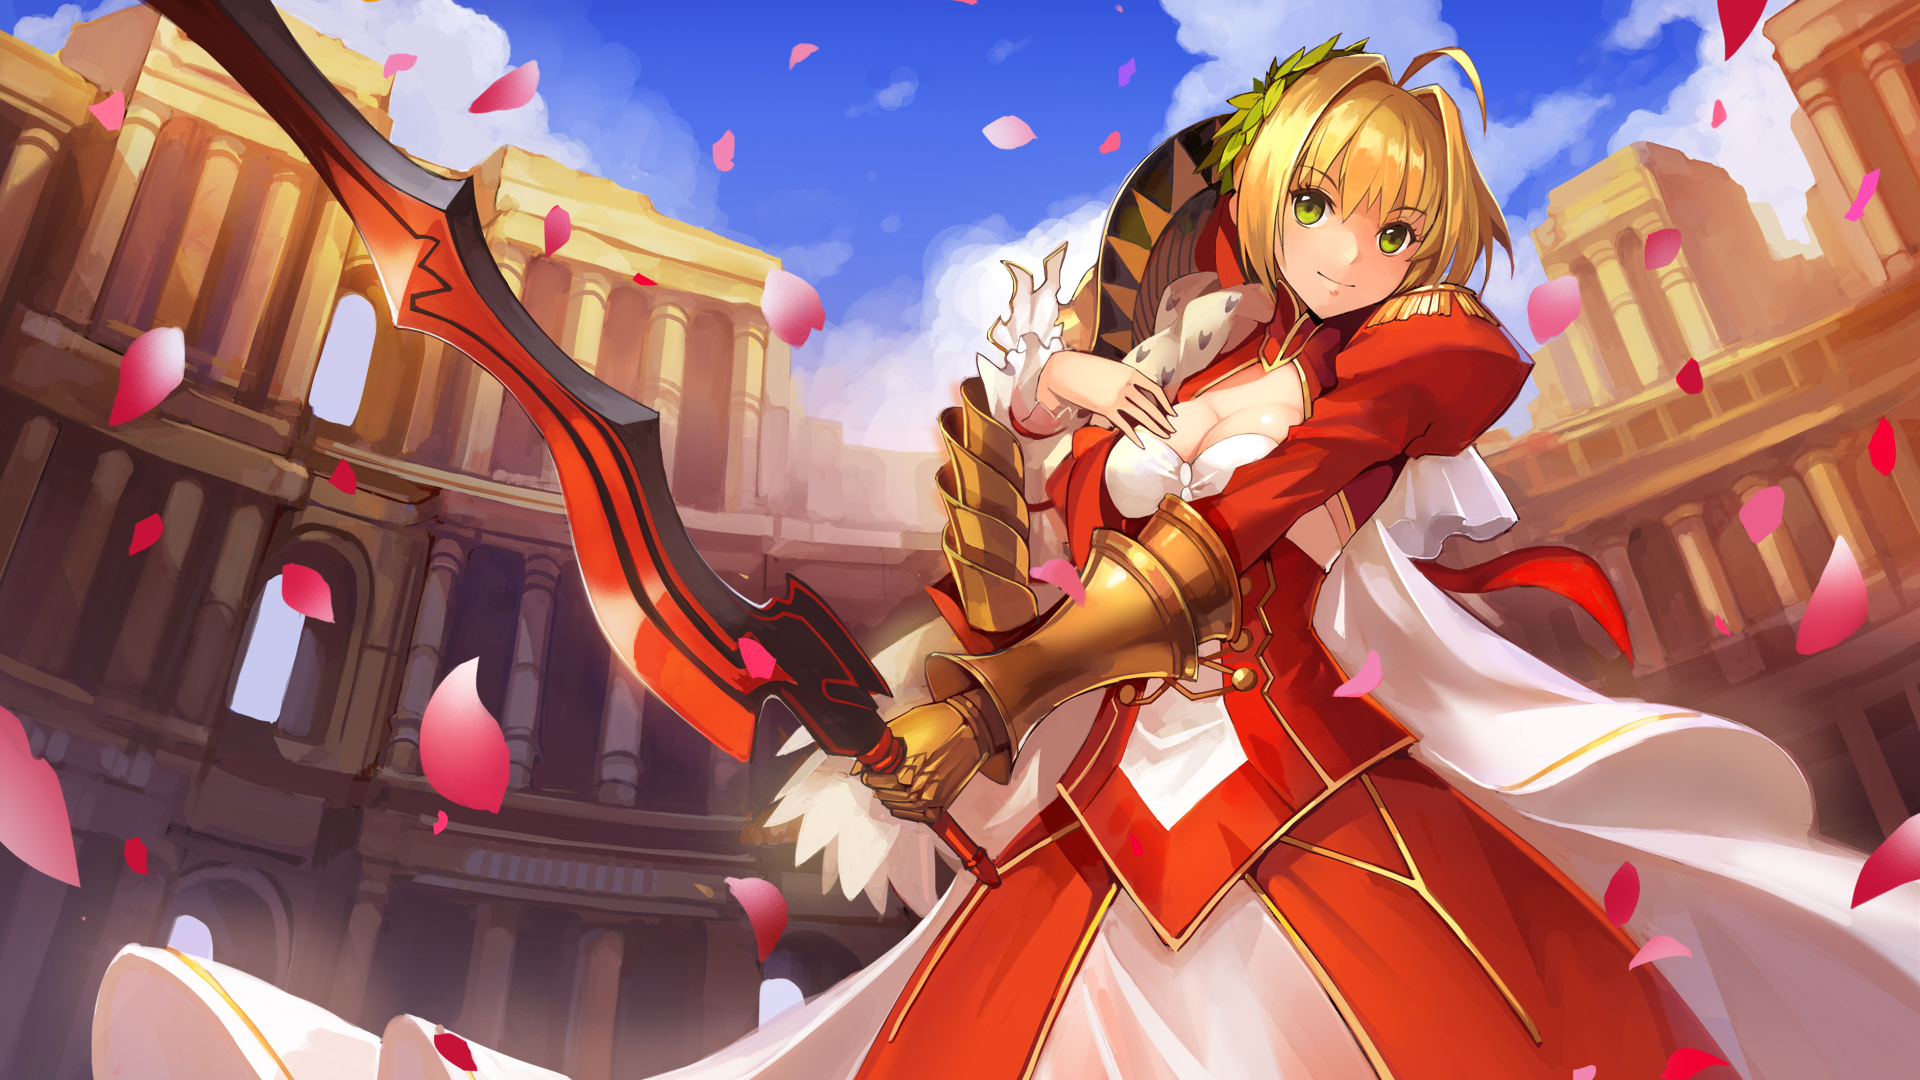 Armor Blonde Dress Fate Stay Night Flower Green Eyes Red Saber Saber Fate Series Short Hair Sword We 1920x1080